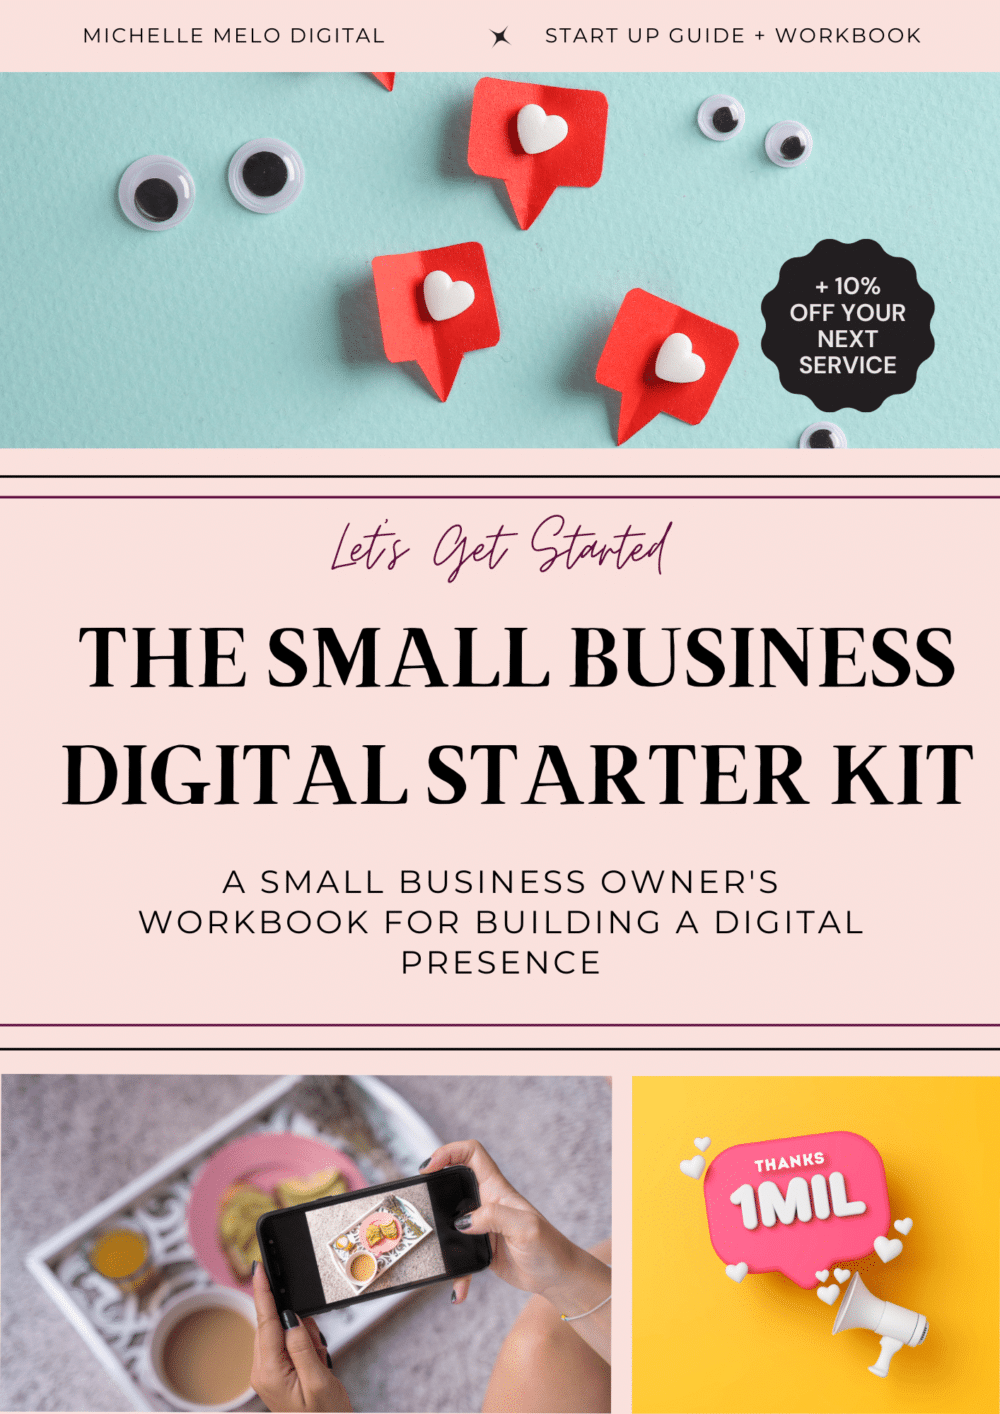 The Small Business digital Starter Kit workbook cover.